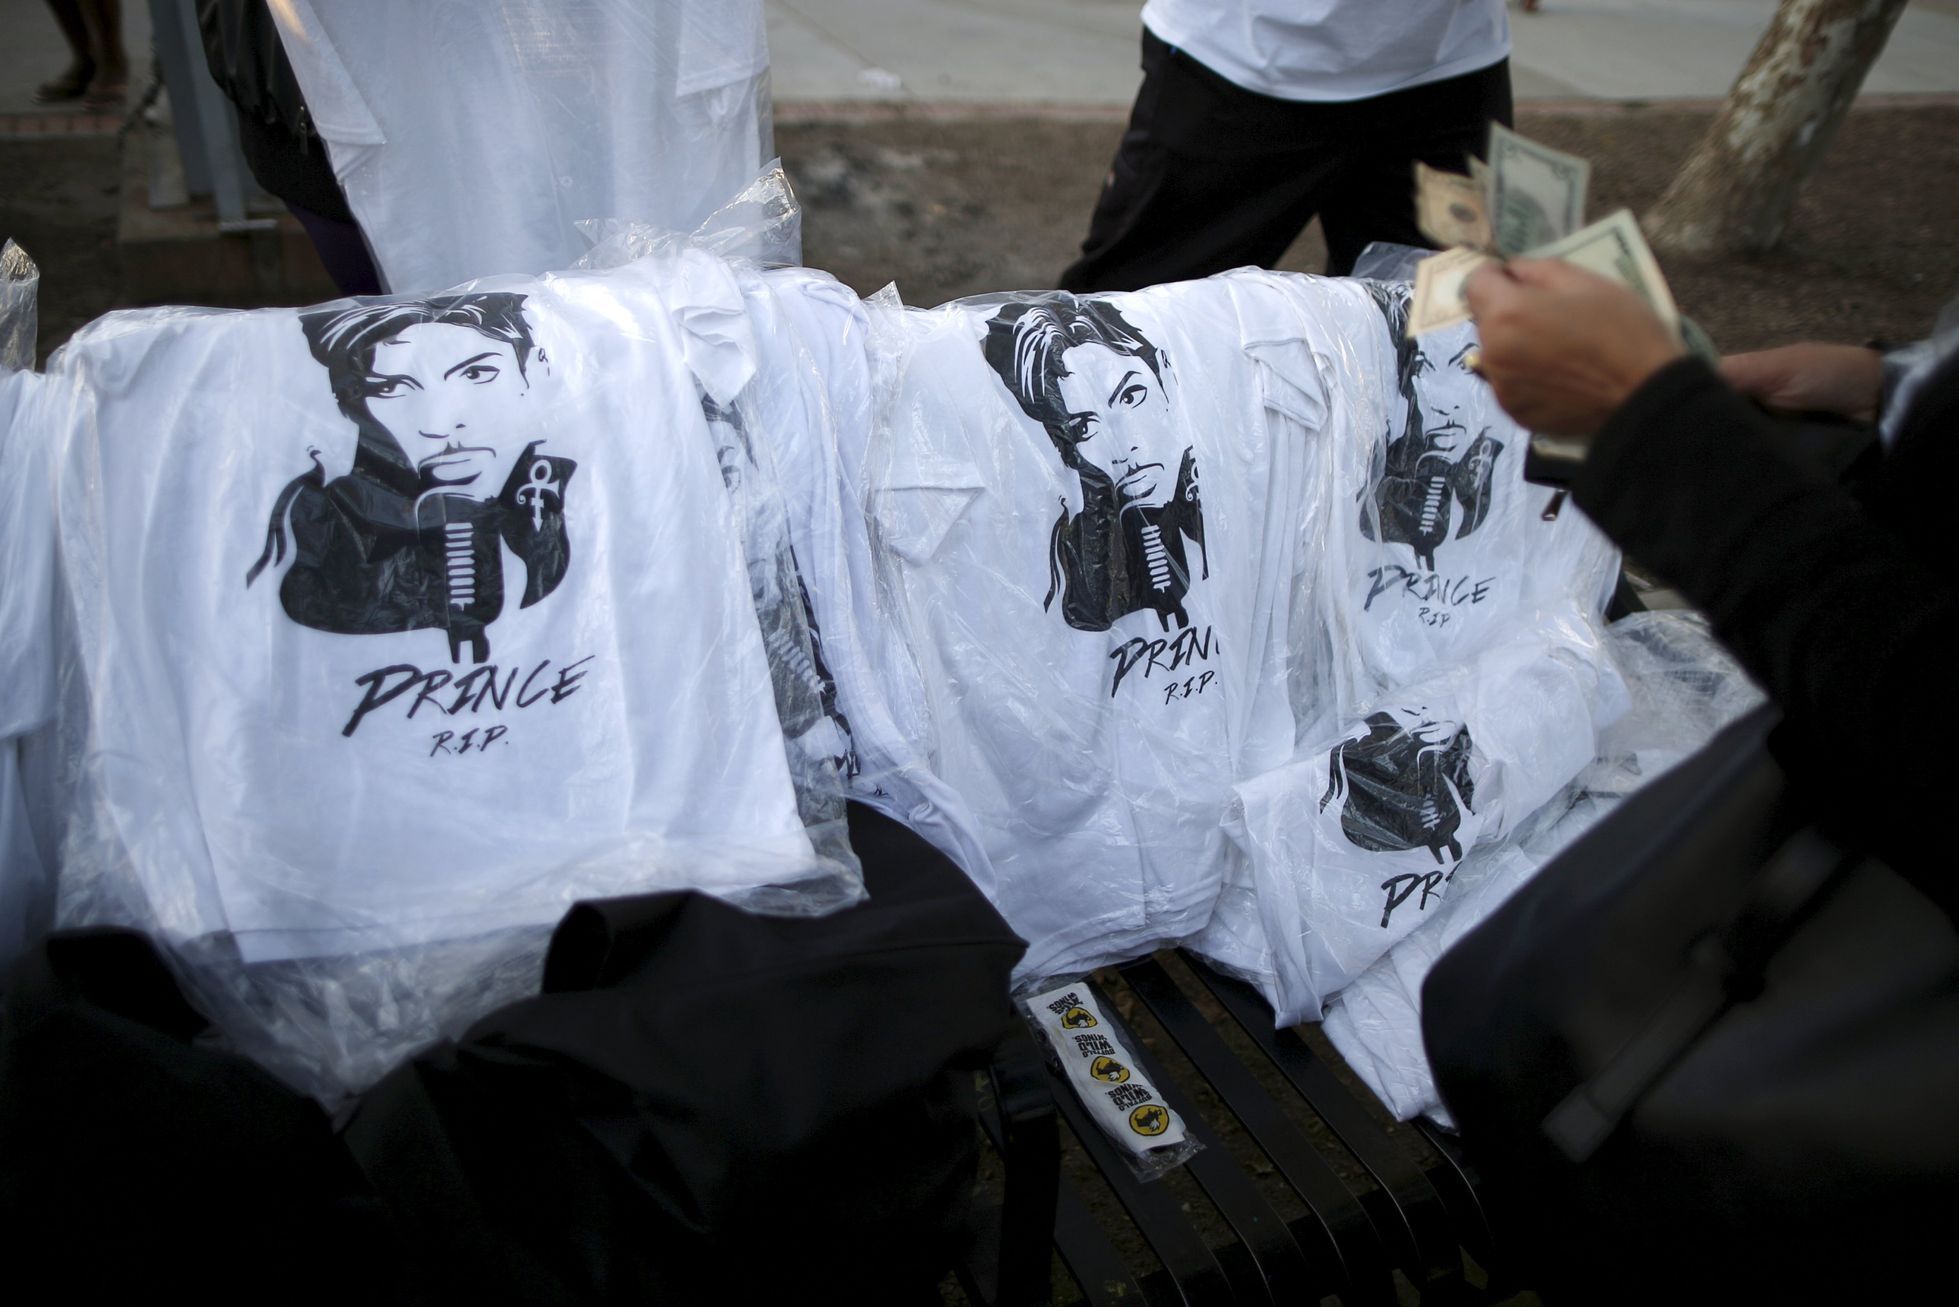 People buy Prince t-shirts at a vigil to celebrate the life and music of deceased musician Prince in Los Angeles